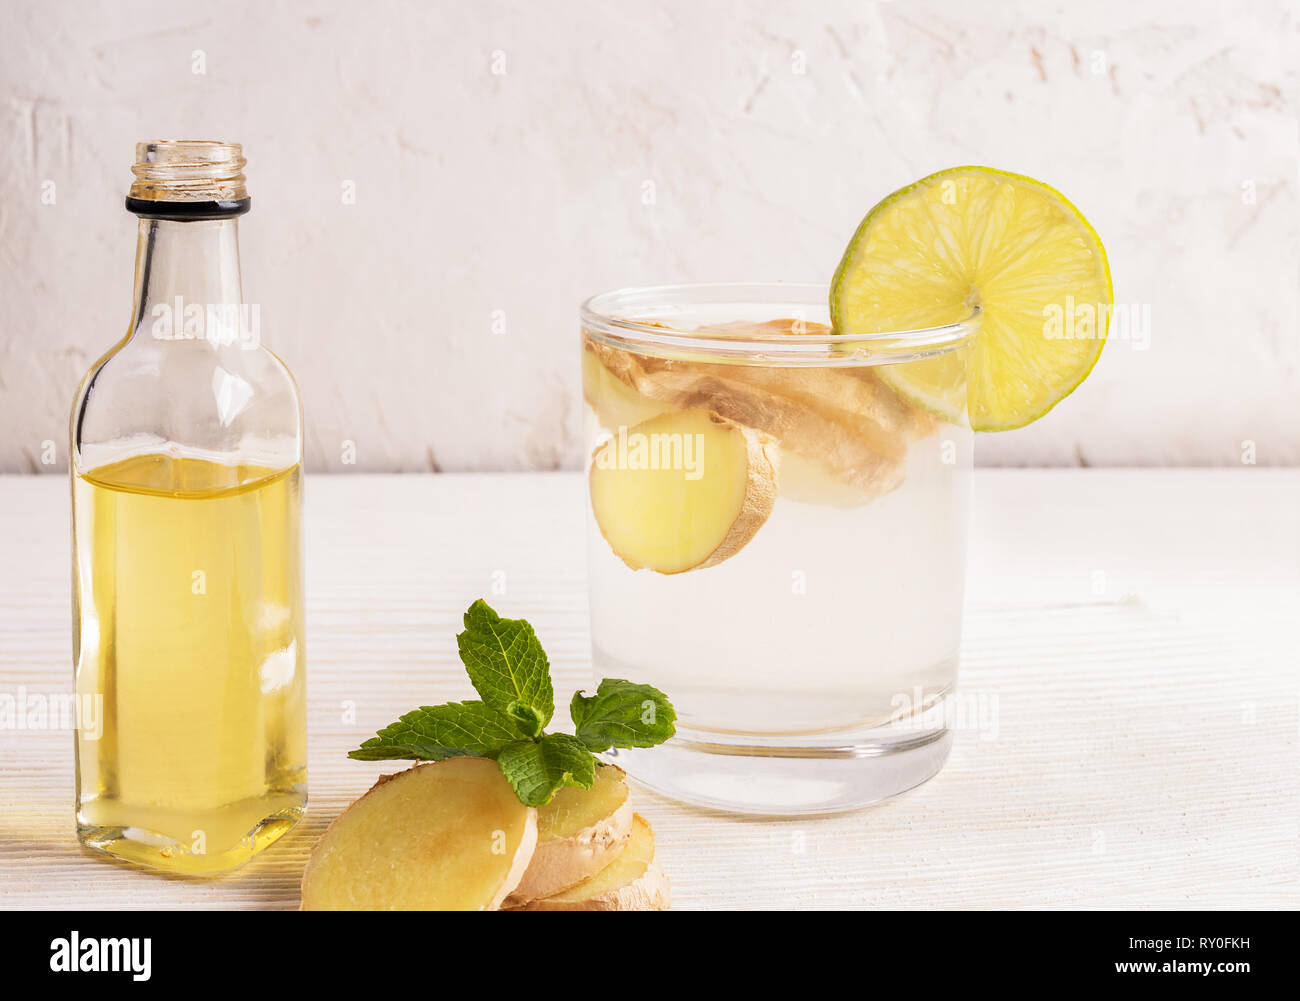 Glass with ginger water and bottle of ginger oil on white table on light  background.  Stock Photo